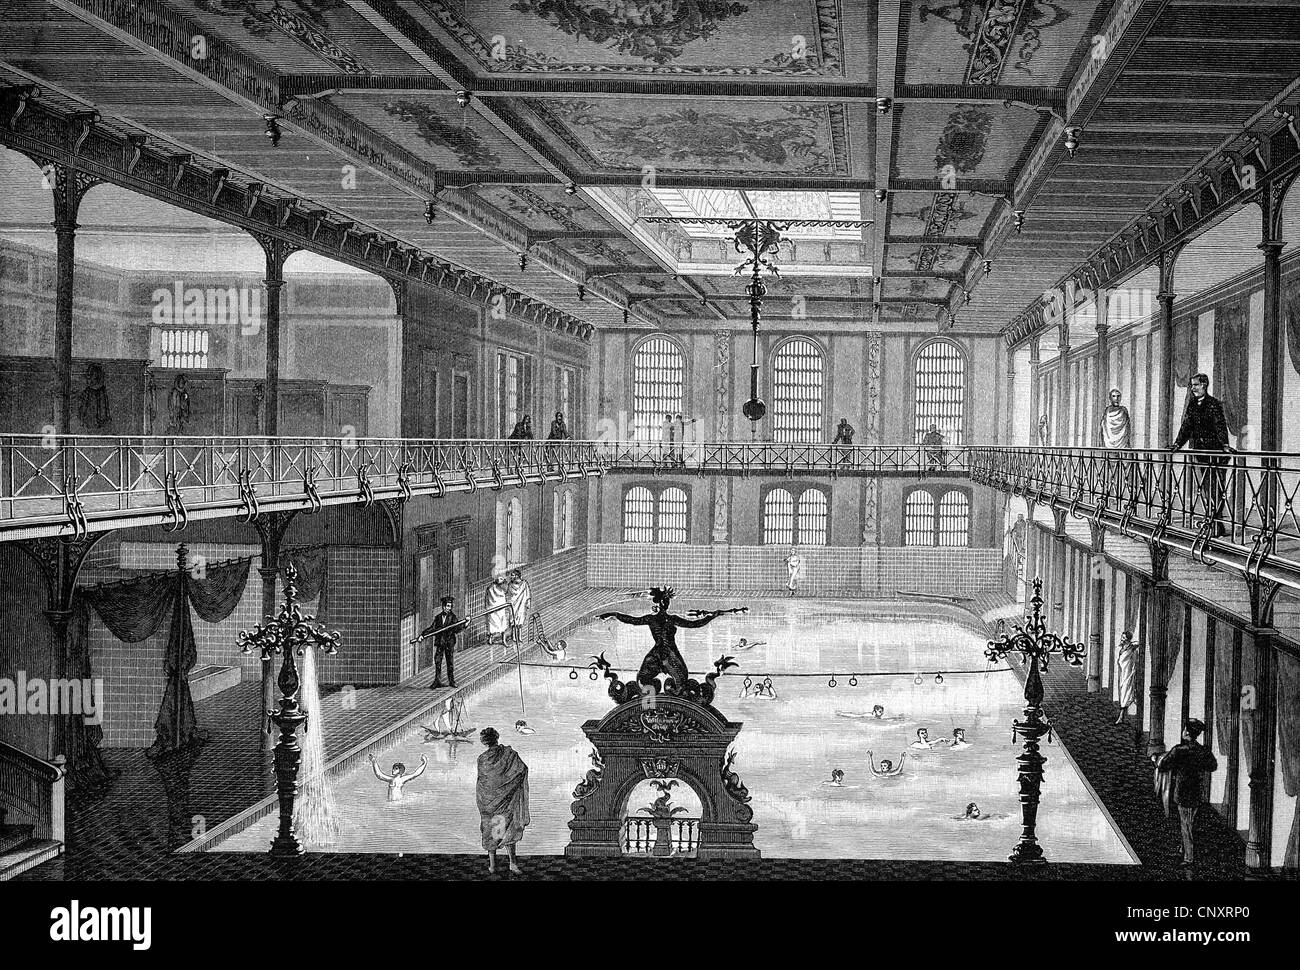 The new indoor swimming pool in Stuttgart, Germany, historical engraving, about 1888 Stock Photo